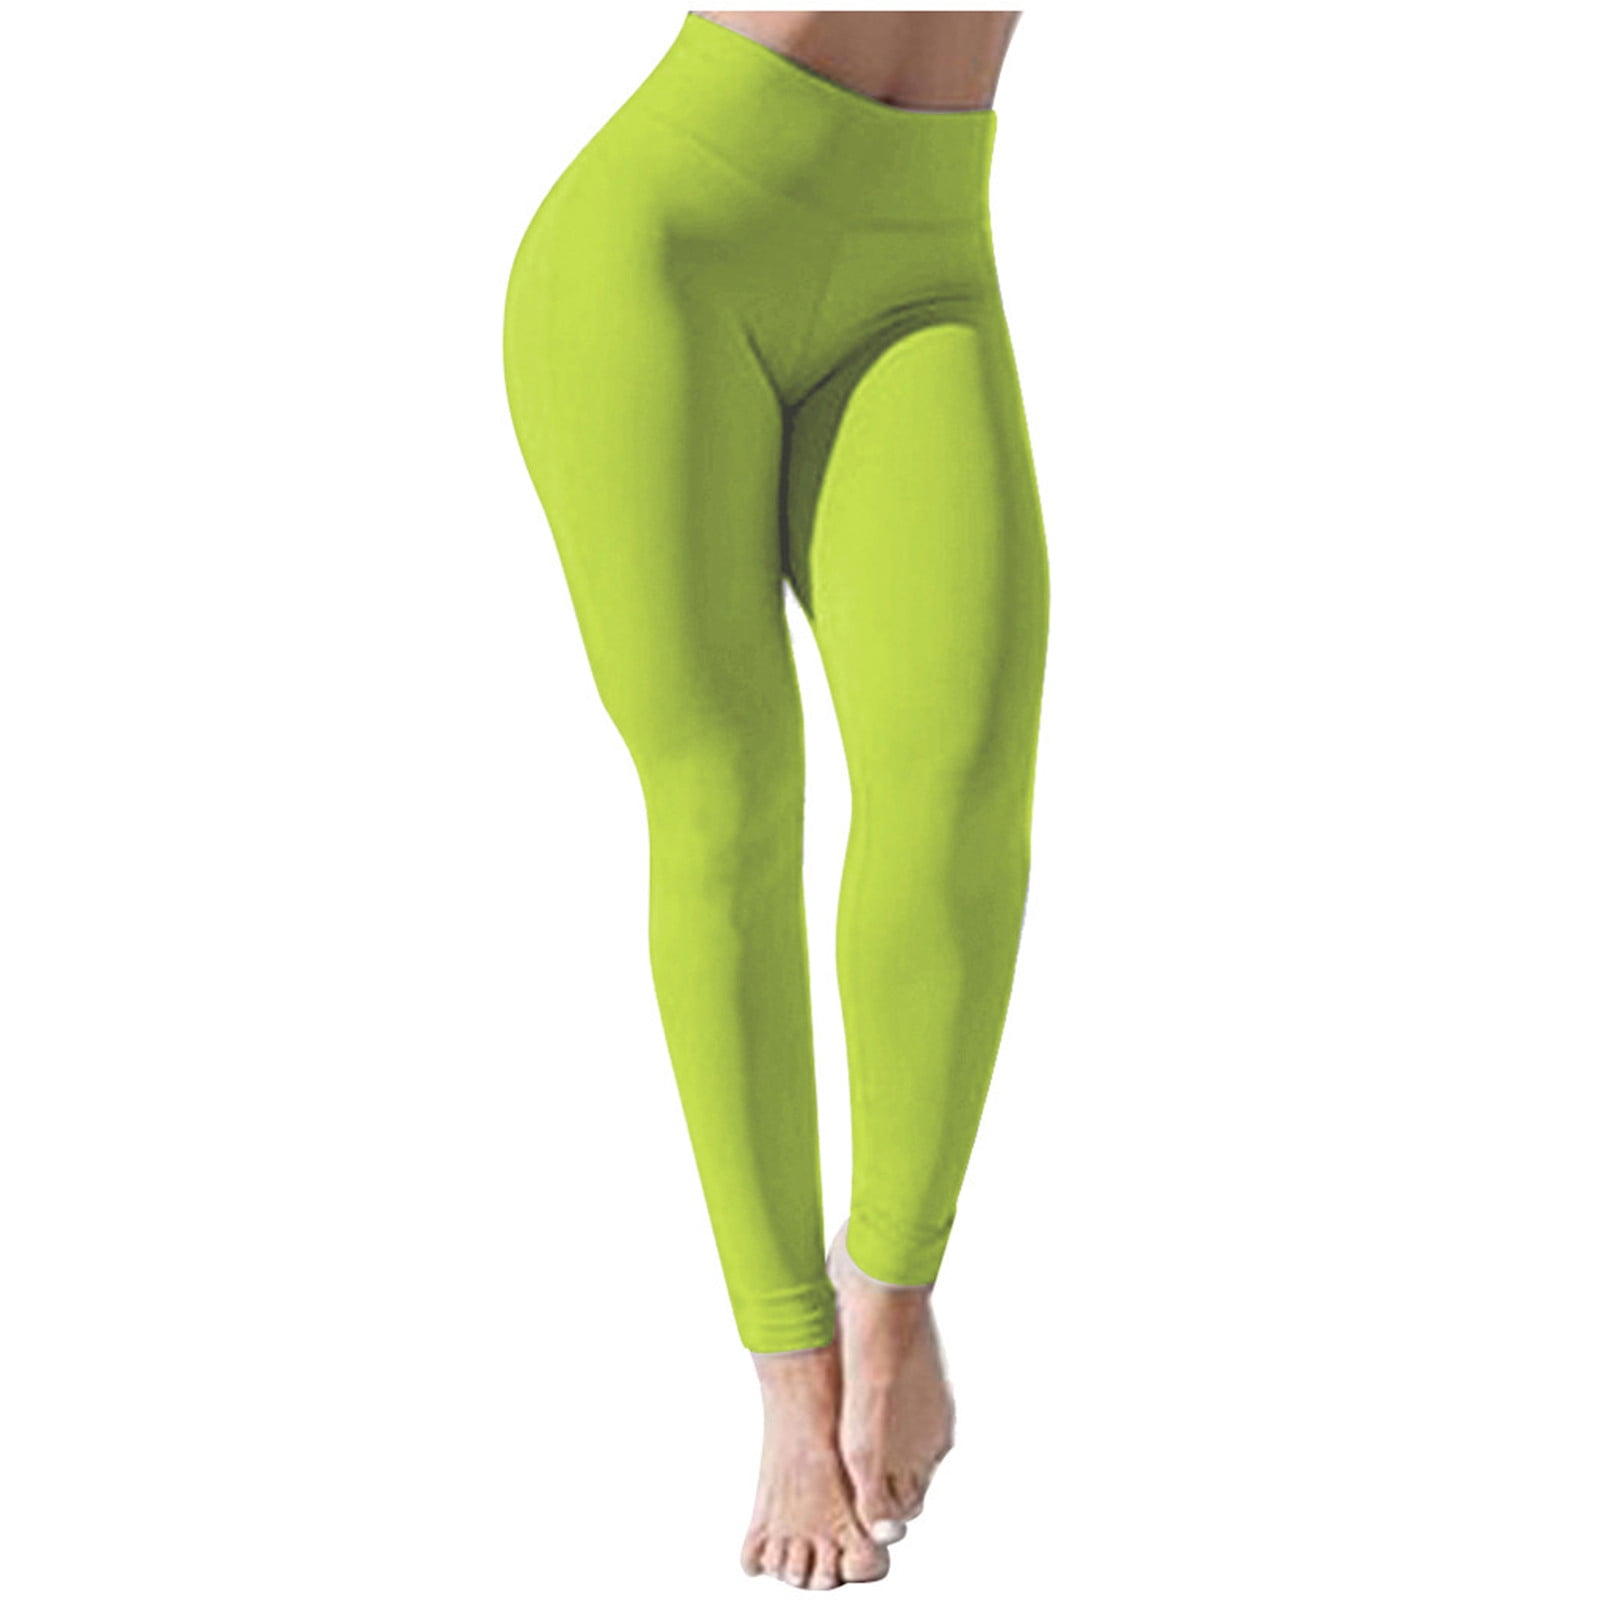 Fast Shipping Women's Plus Size Nude Yoga Pants Women's High Waist Hip  Lifting Stretch Fitness Pants Avoid Camel Toes